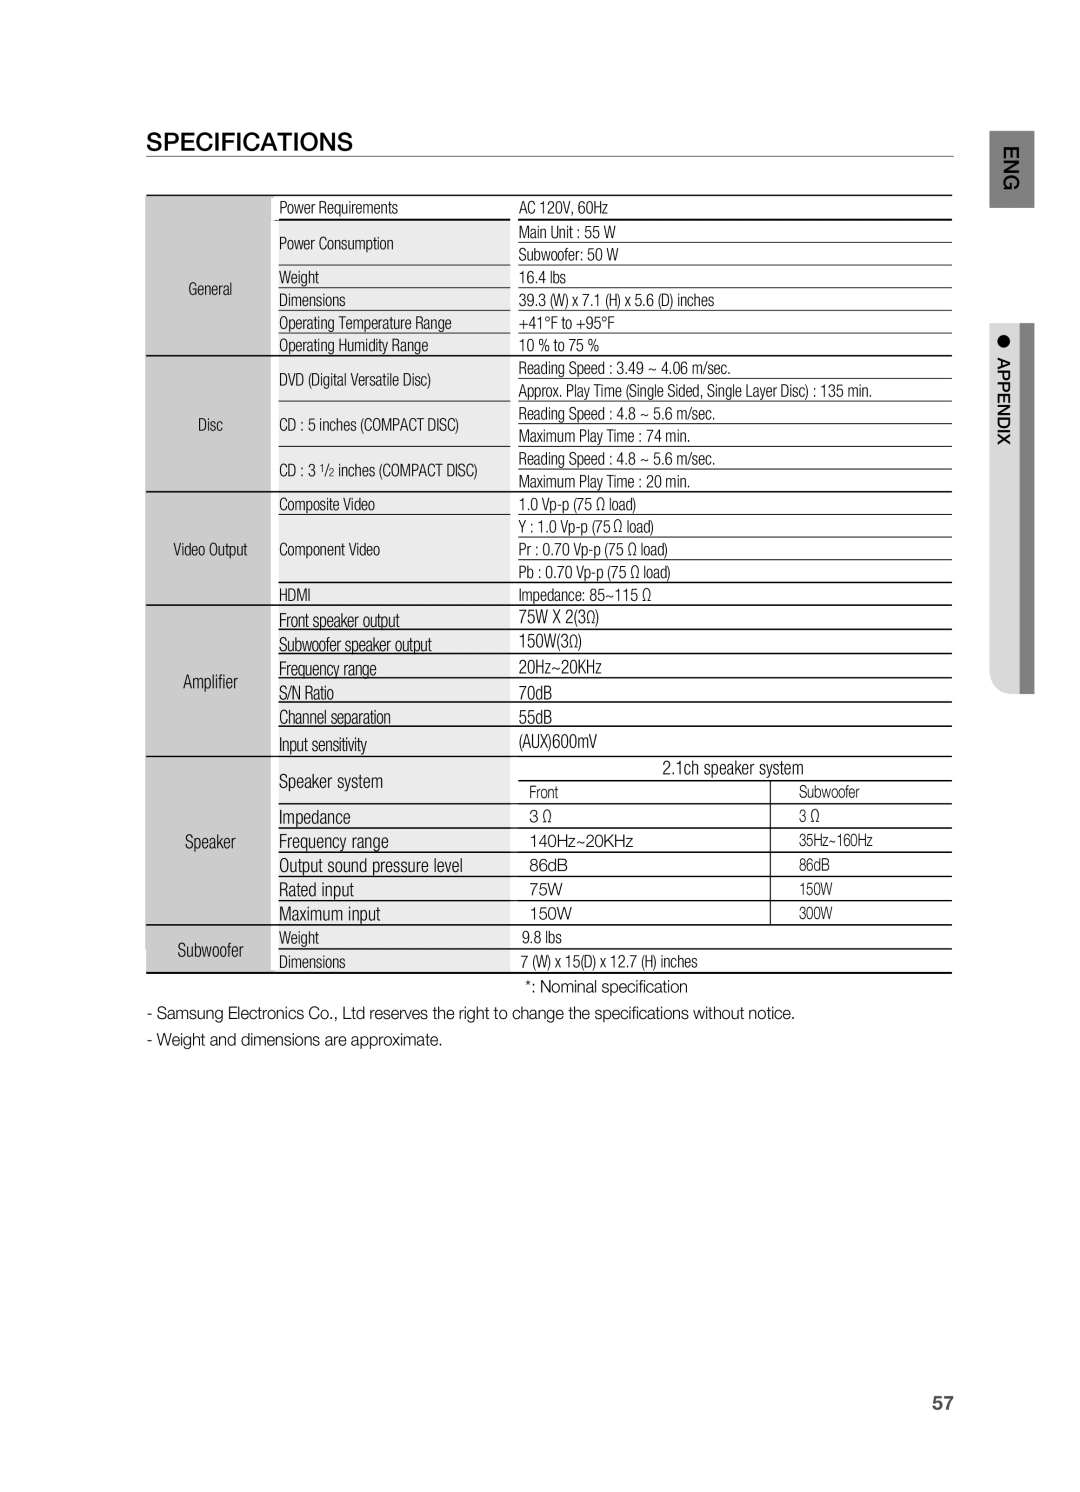 Samsung HT-X810 user manual Specifications 